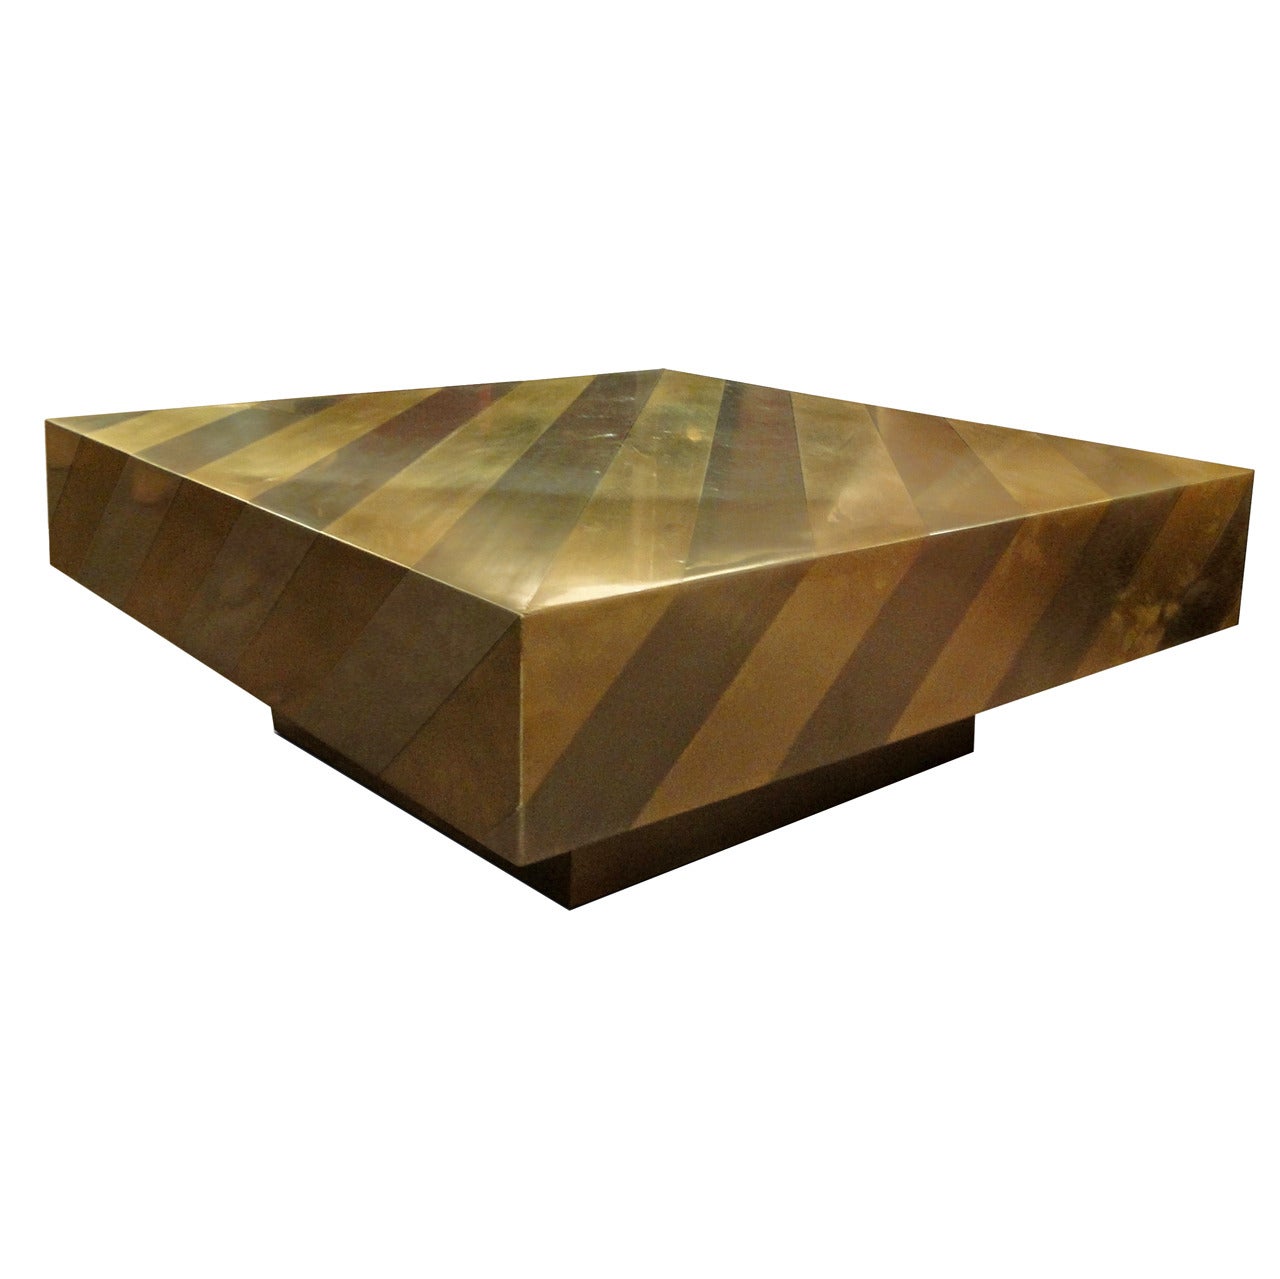 A square-shaped coffee table